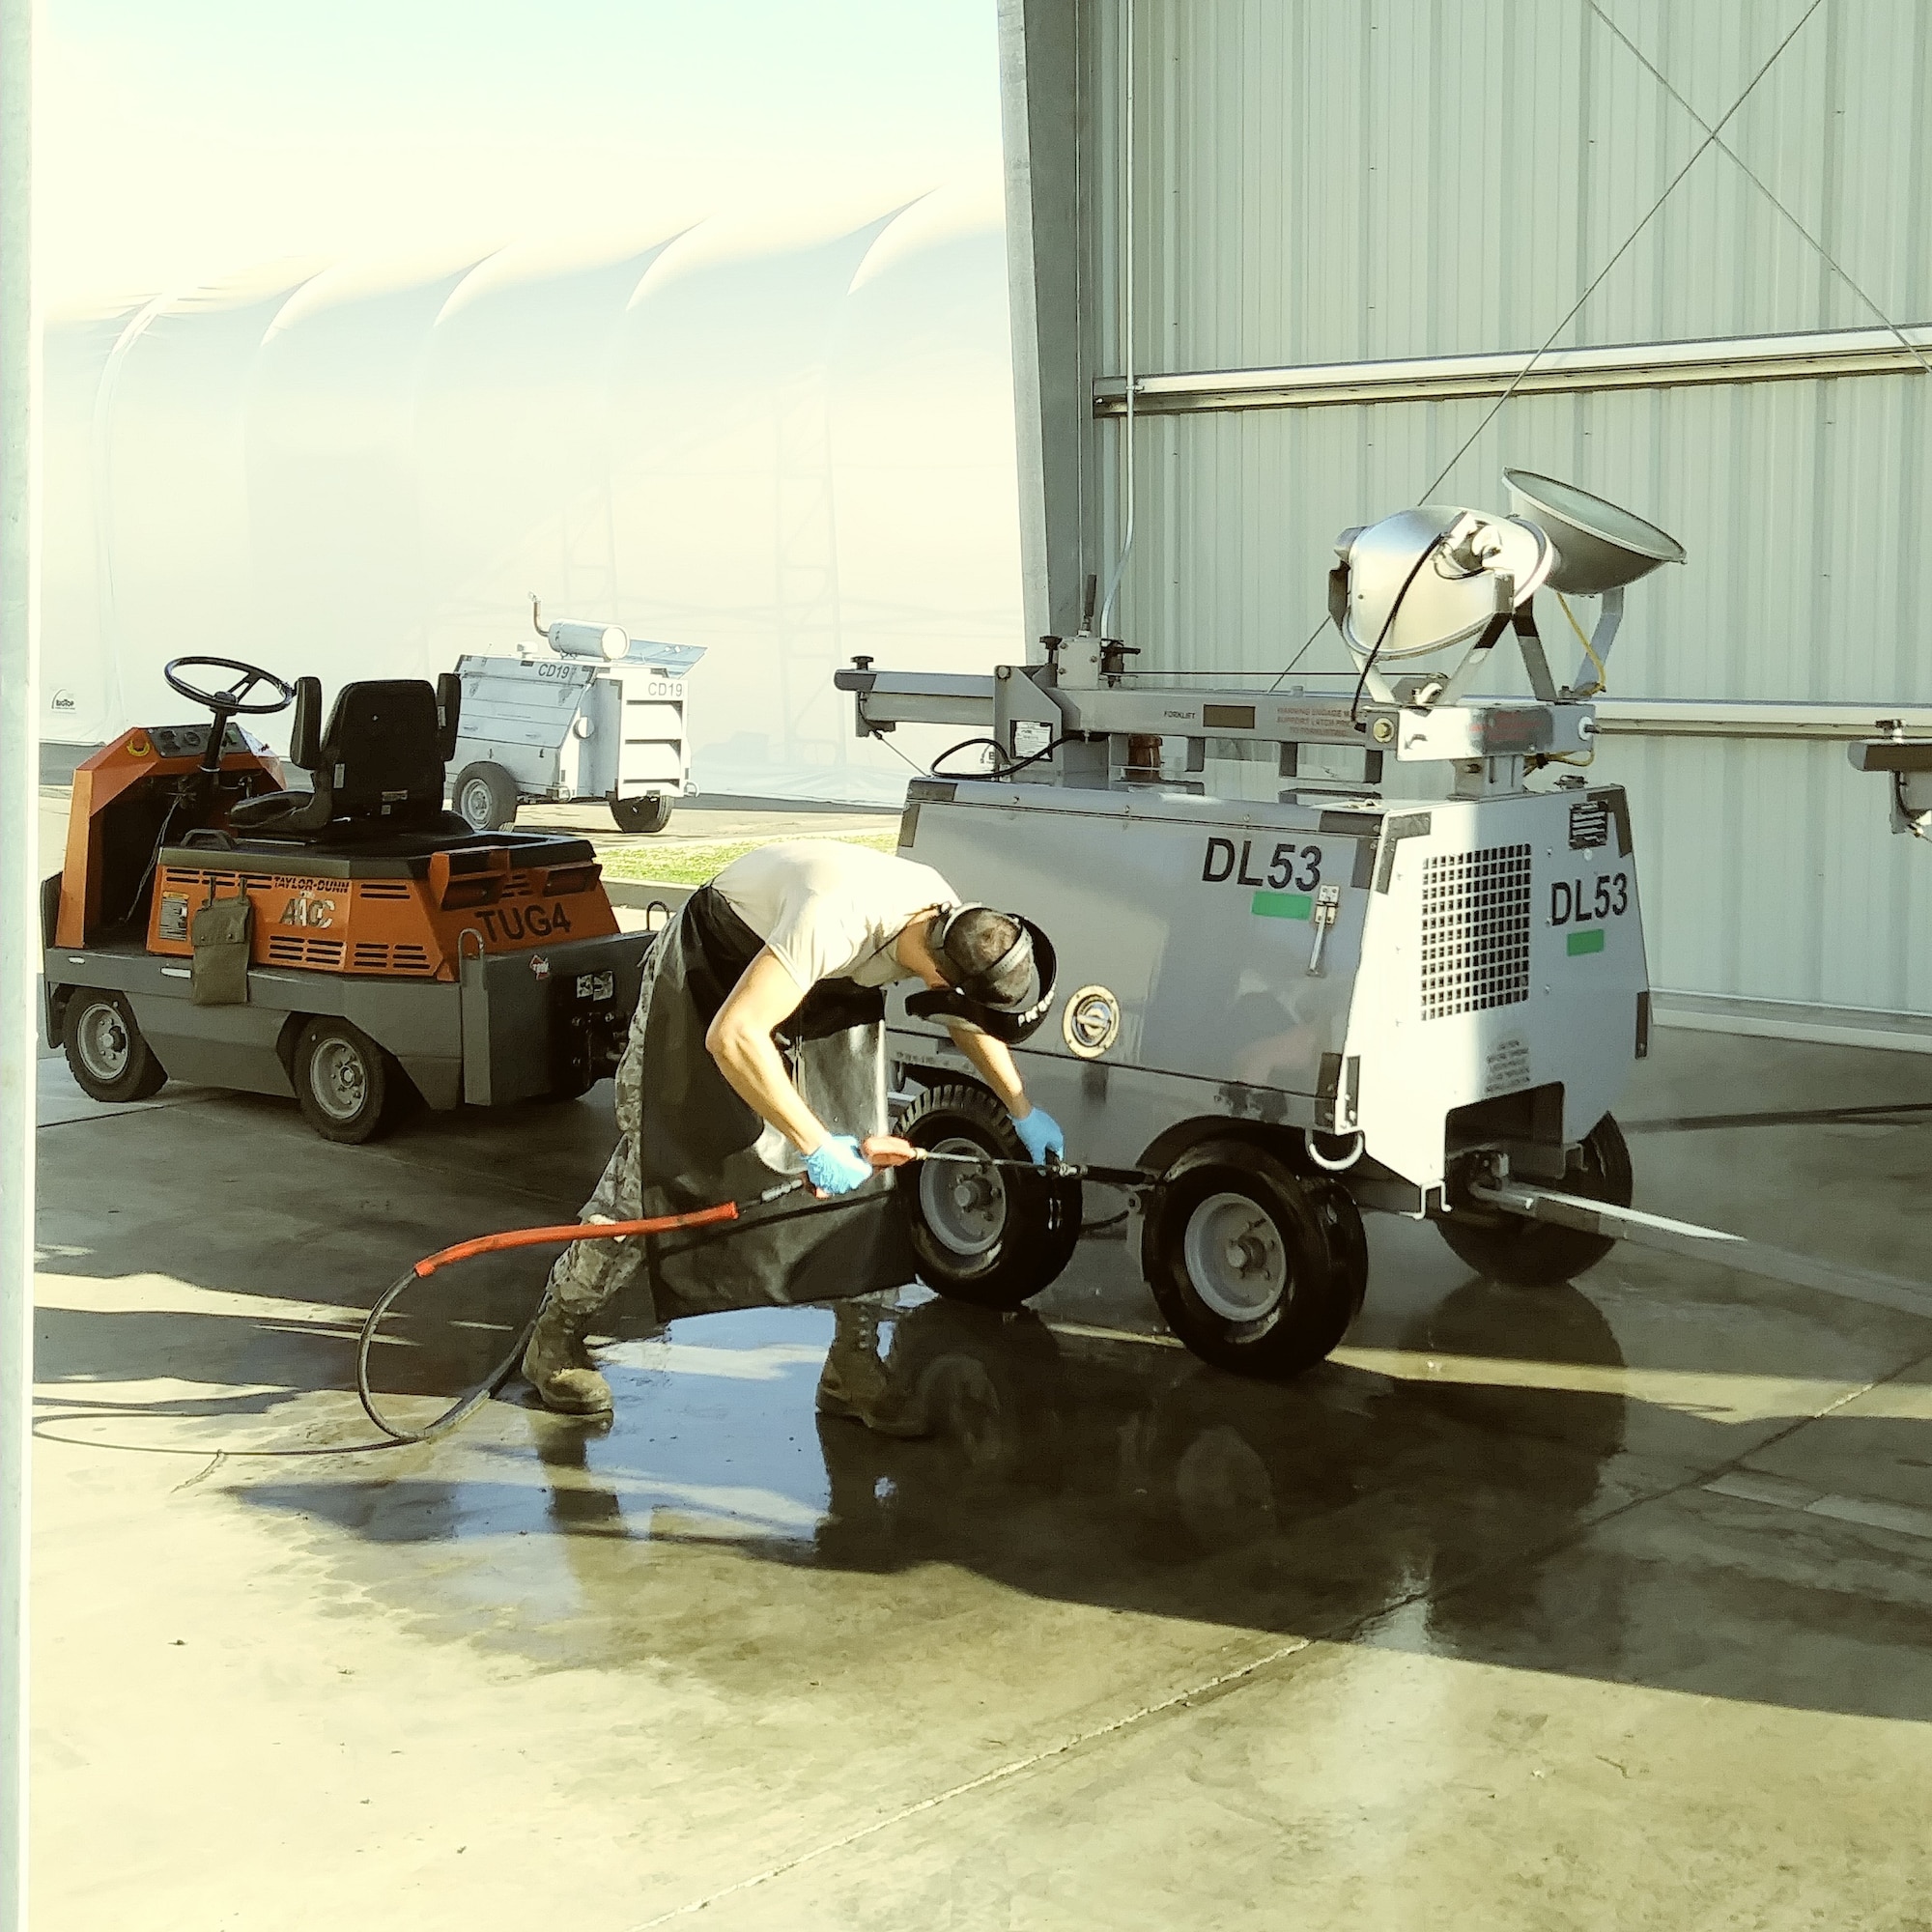 An AGE maintenance crew member uses the new wash rack to clean residue from flight line equipment.